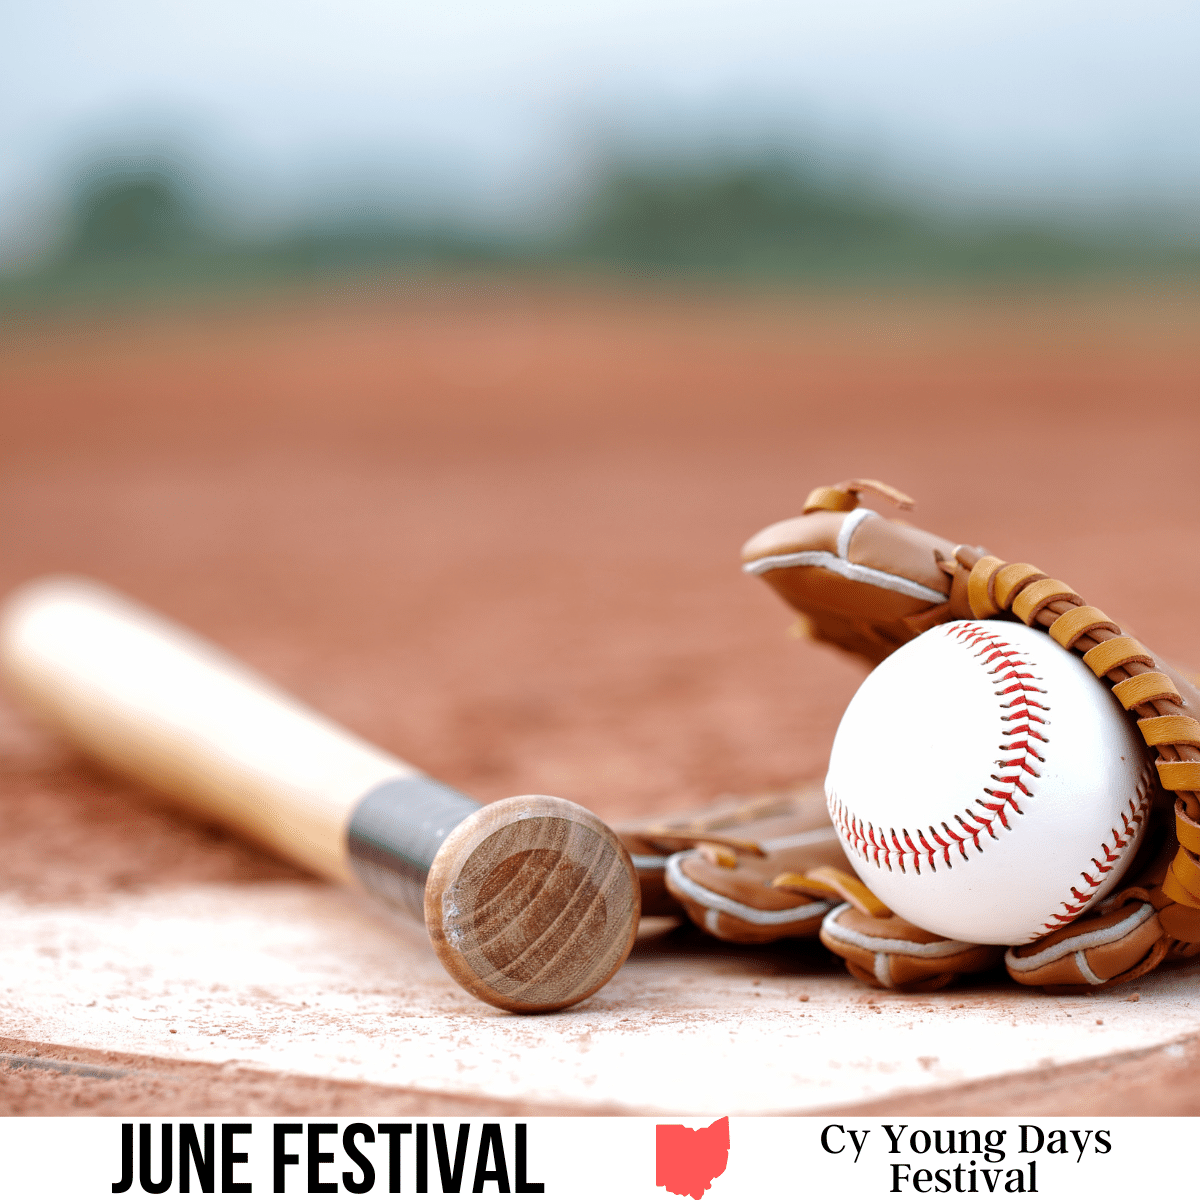 A square image of a photo of a baseball bat, ball, and glove lying on a base on a baseball diamond. A white strip across the bottom has text June Festival Cy Young Days Festival.